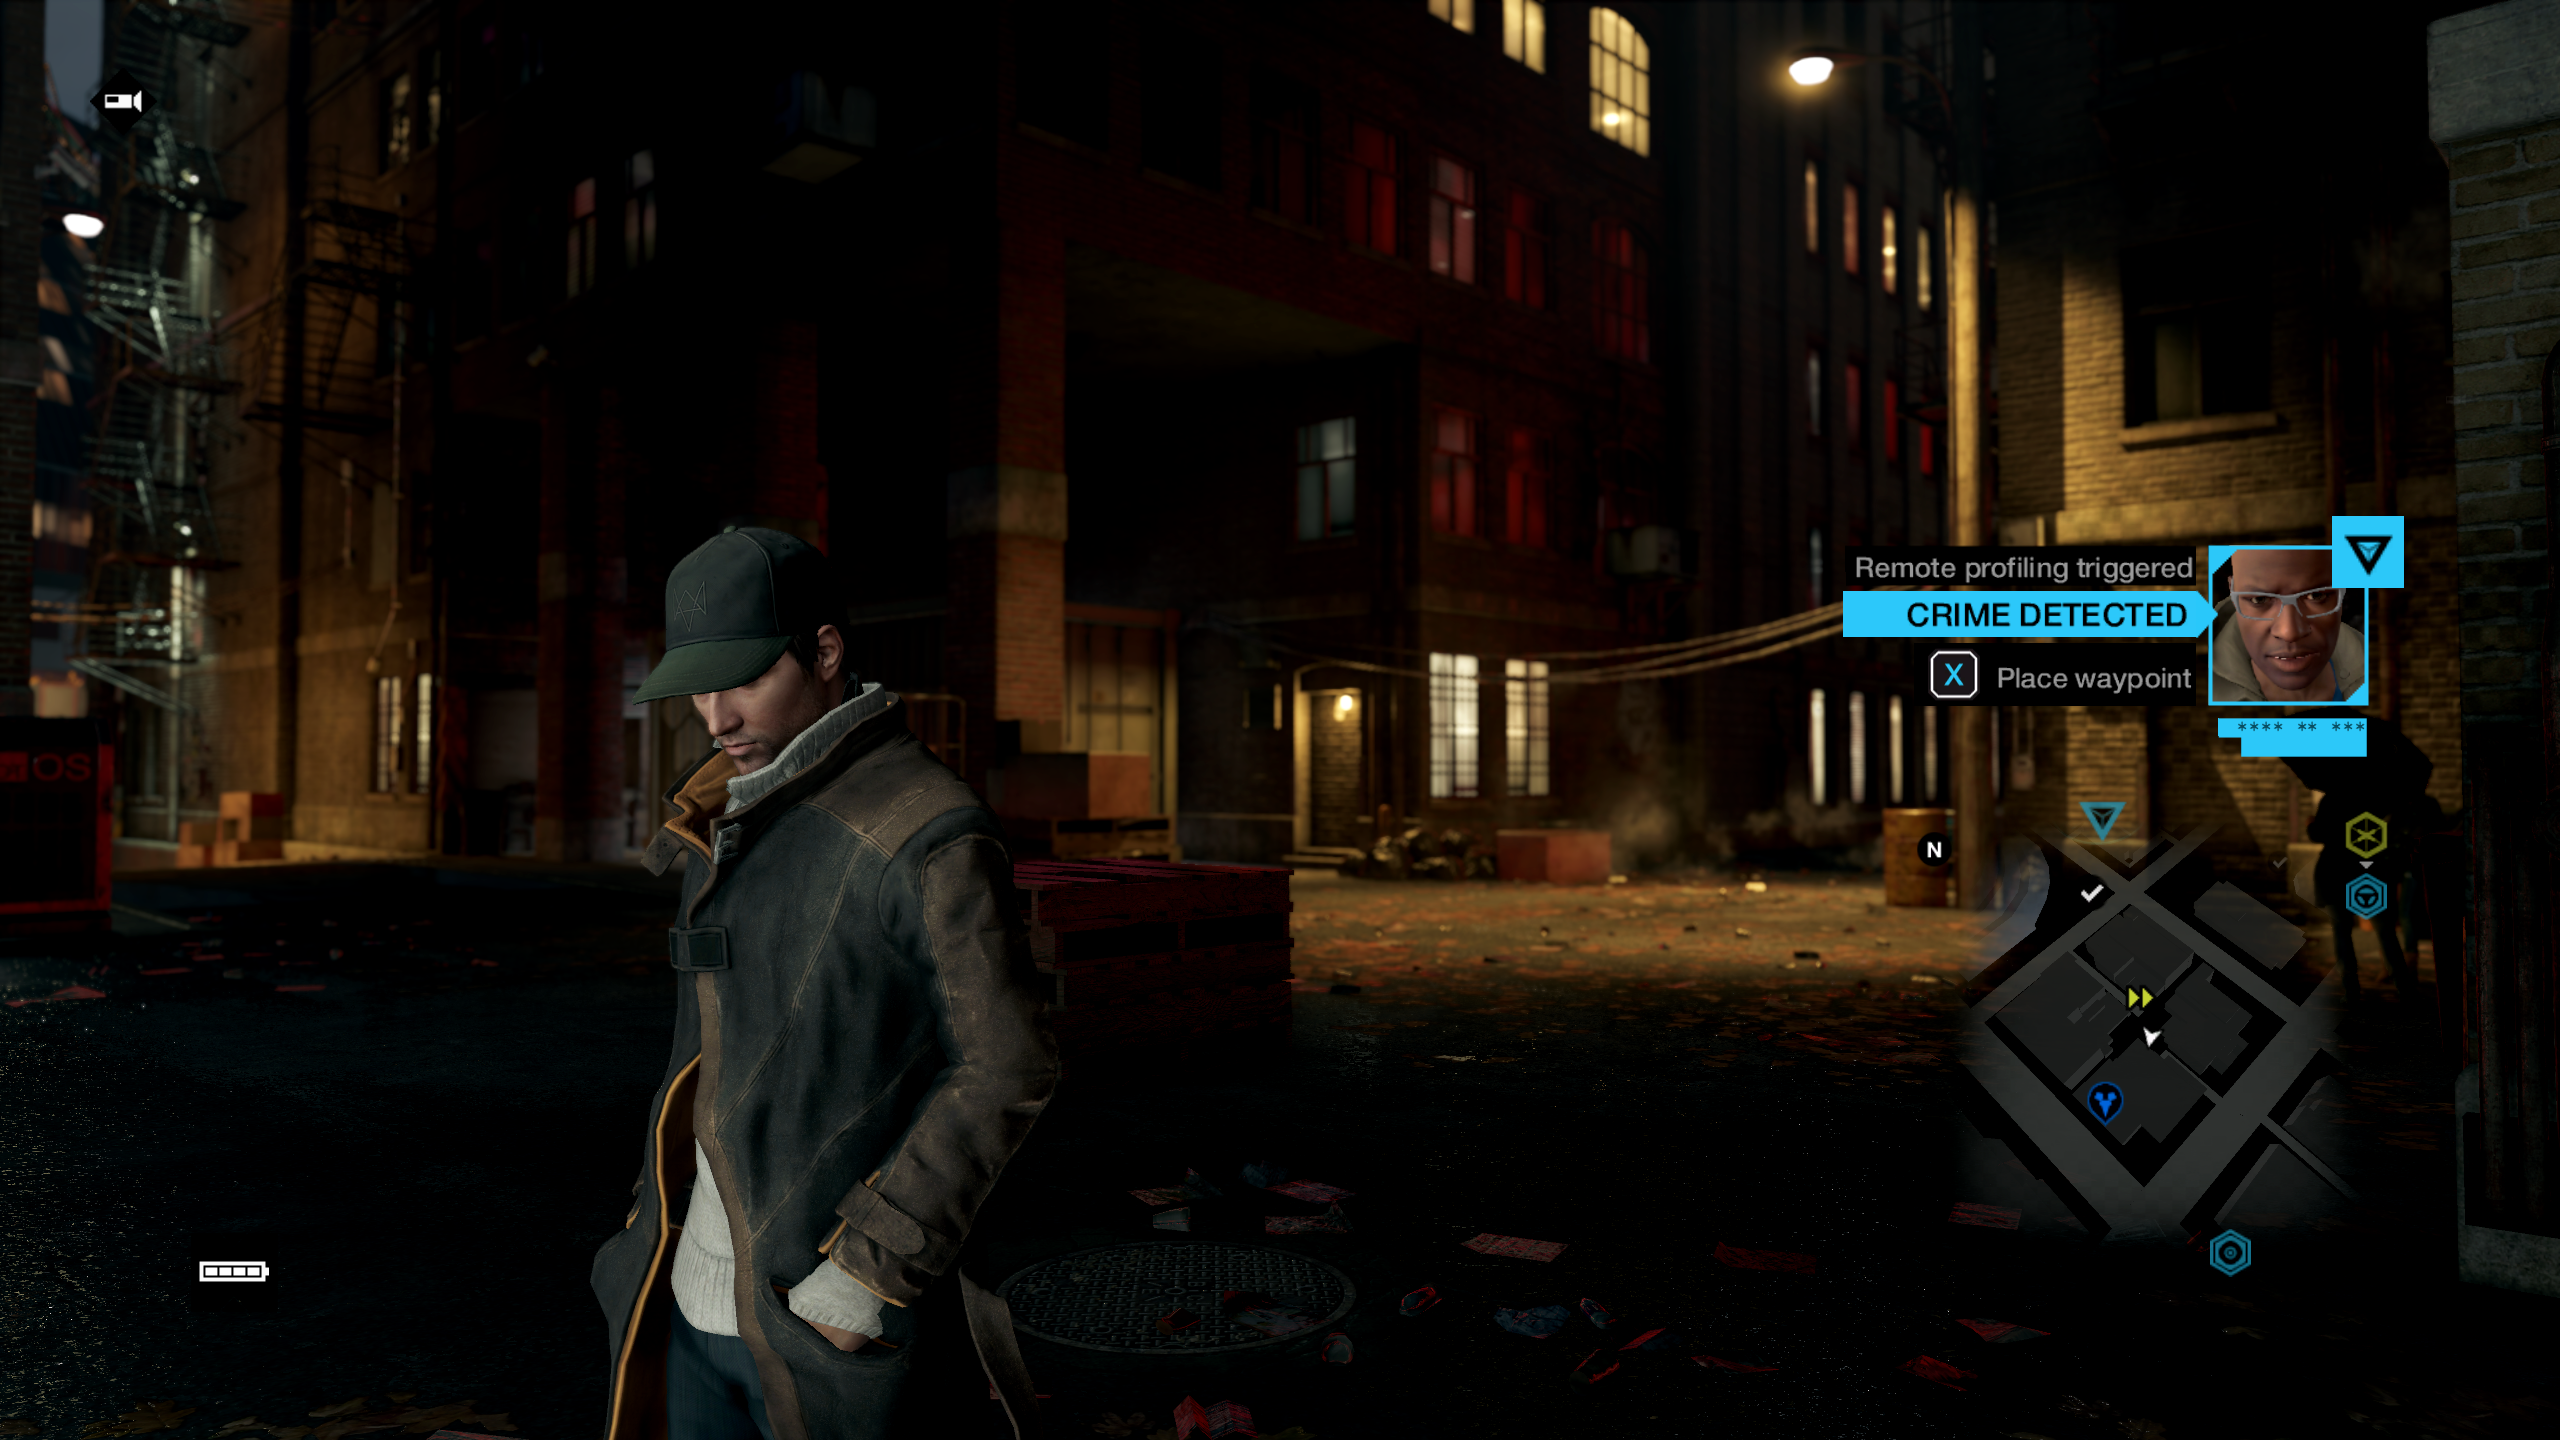 Watch_Dogs_2014_06_21_23_15_26_934.png